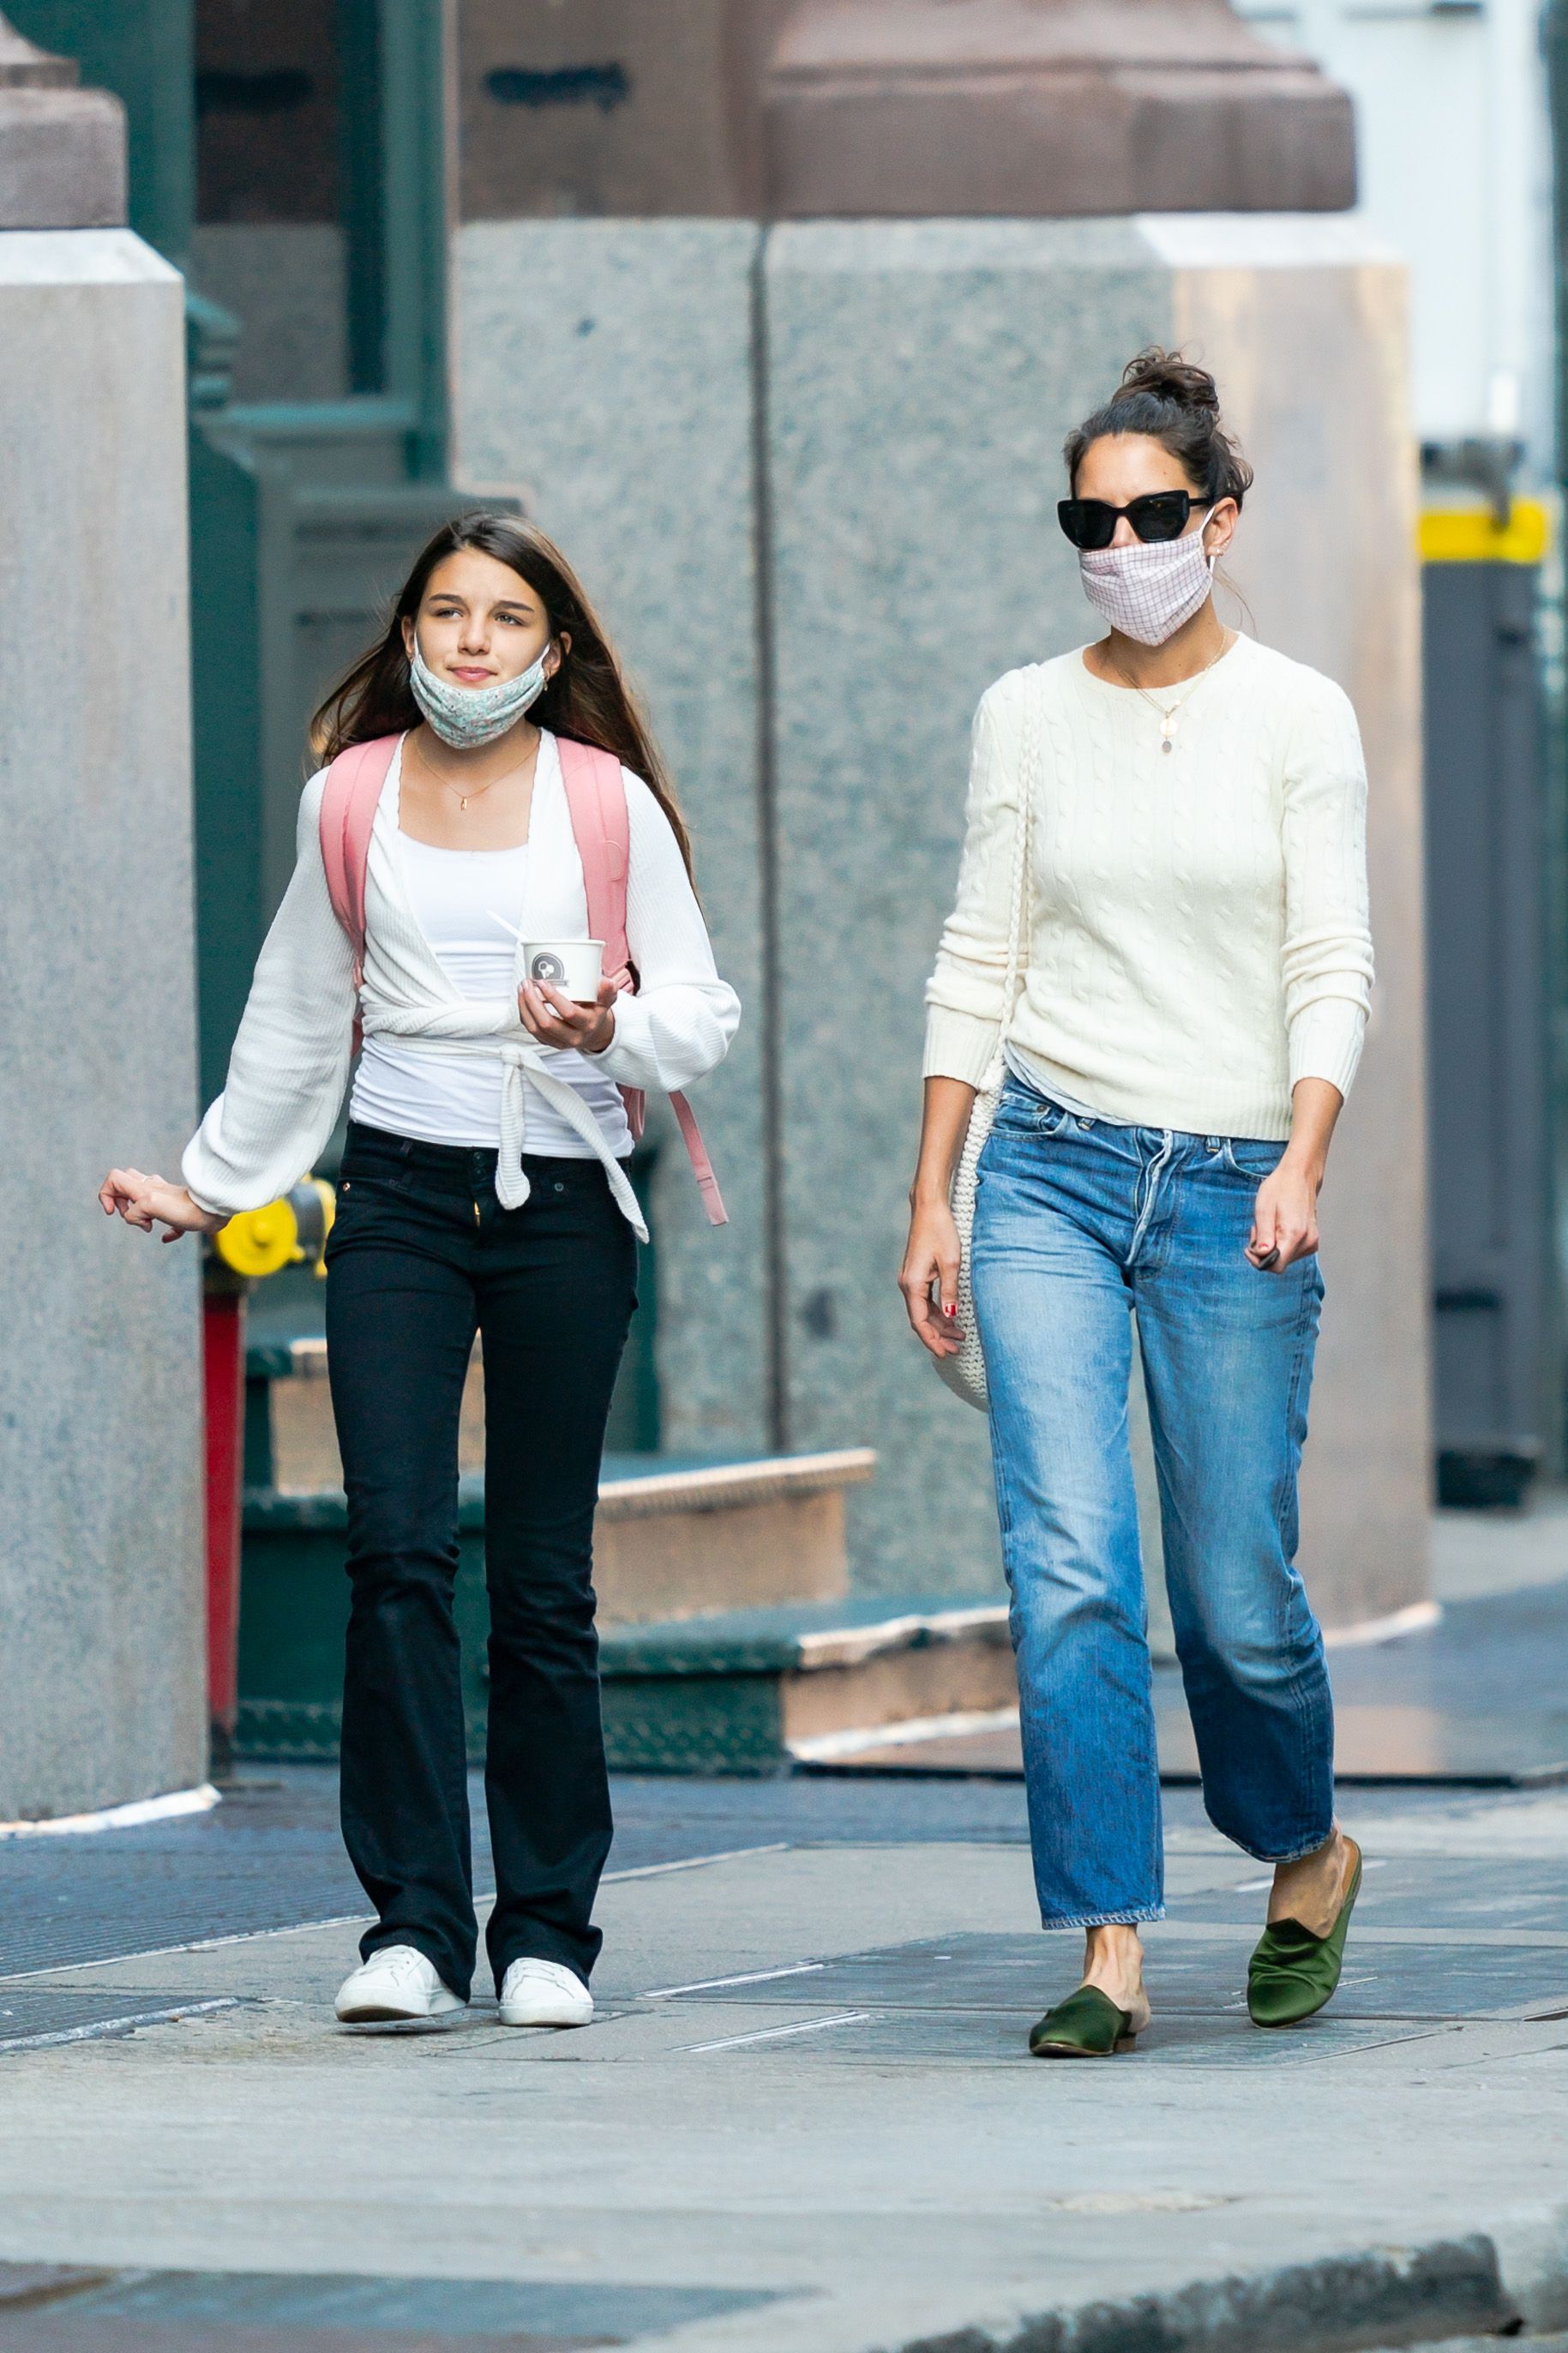 Suri Cruise and Katie Holmes are seen on September 8, 2020 in New York City.  |  Source: Getty Images